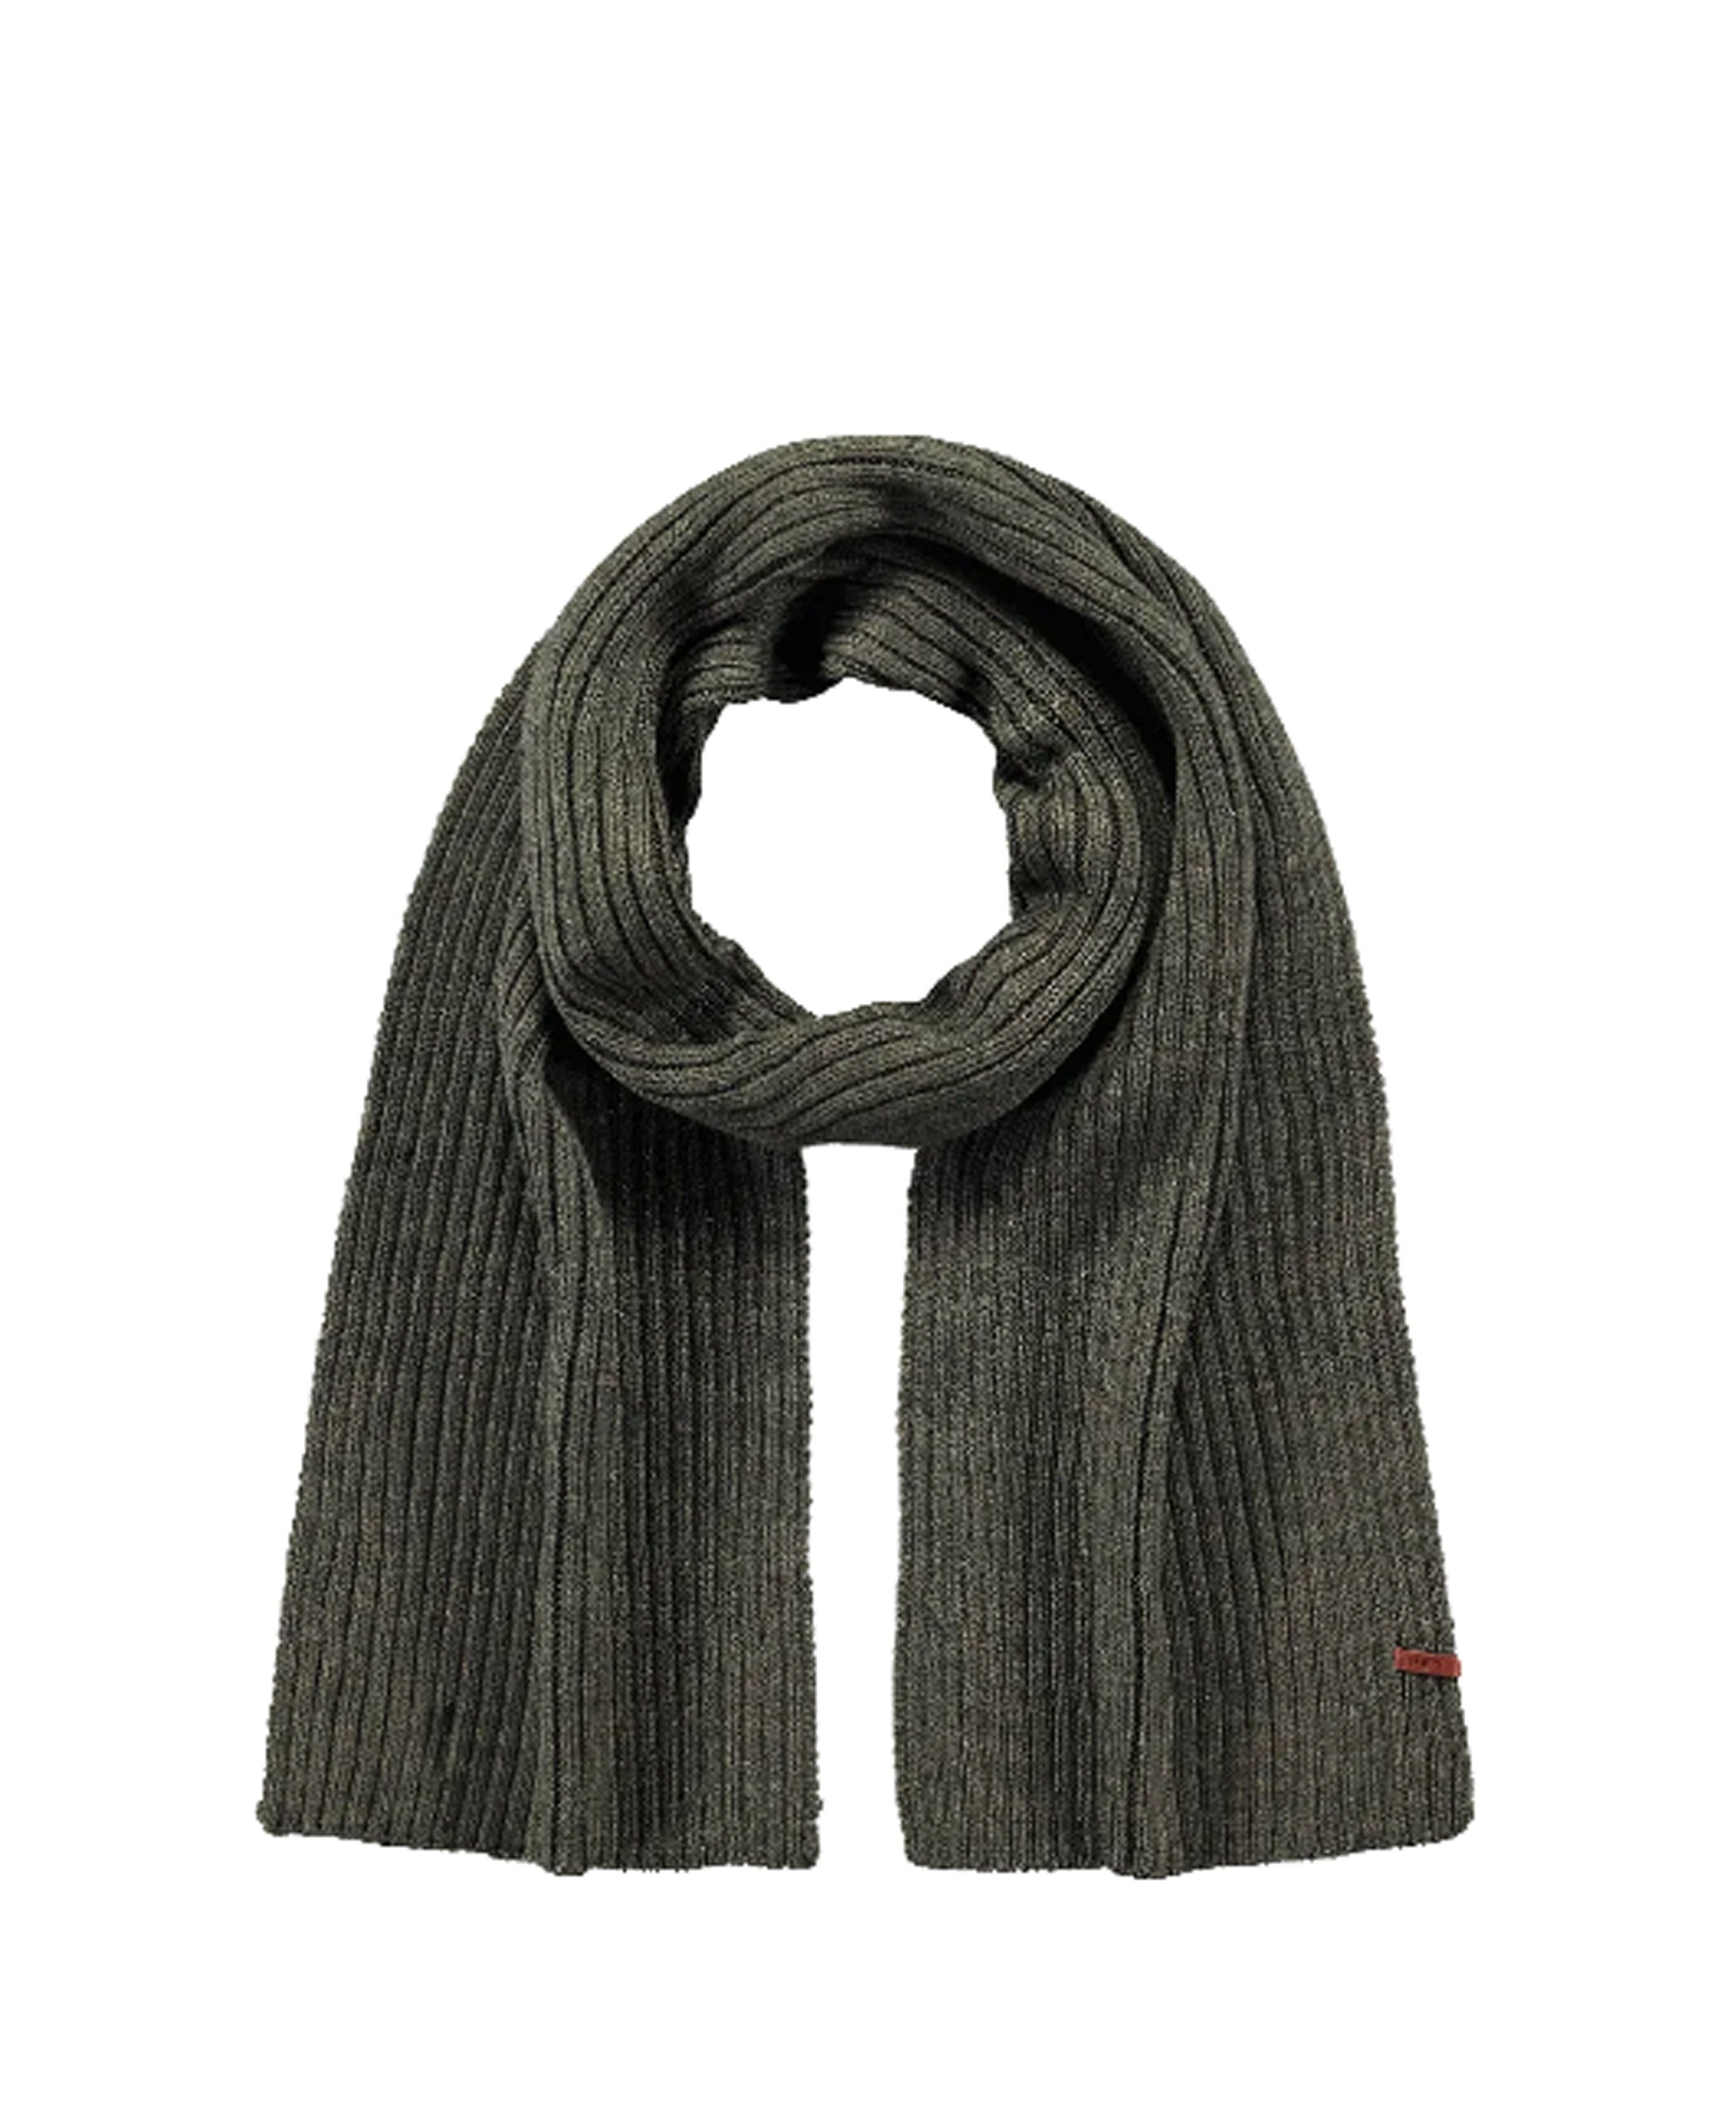 Wilbert Scarf - Army